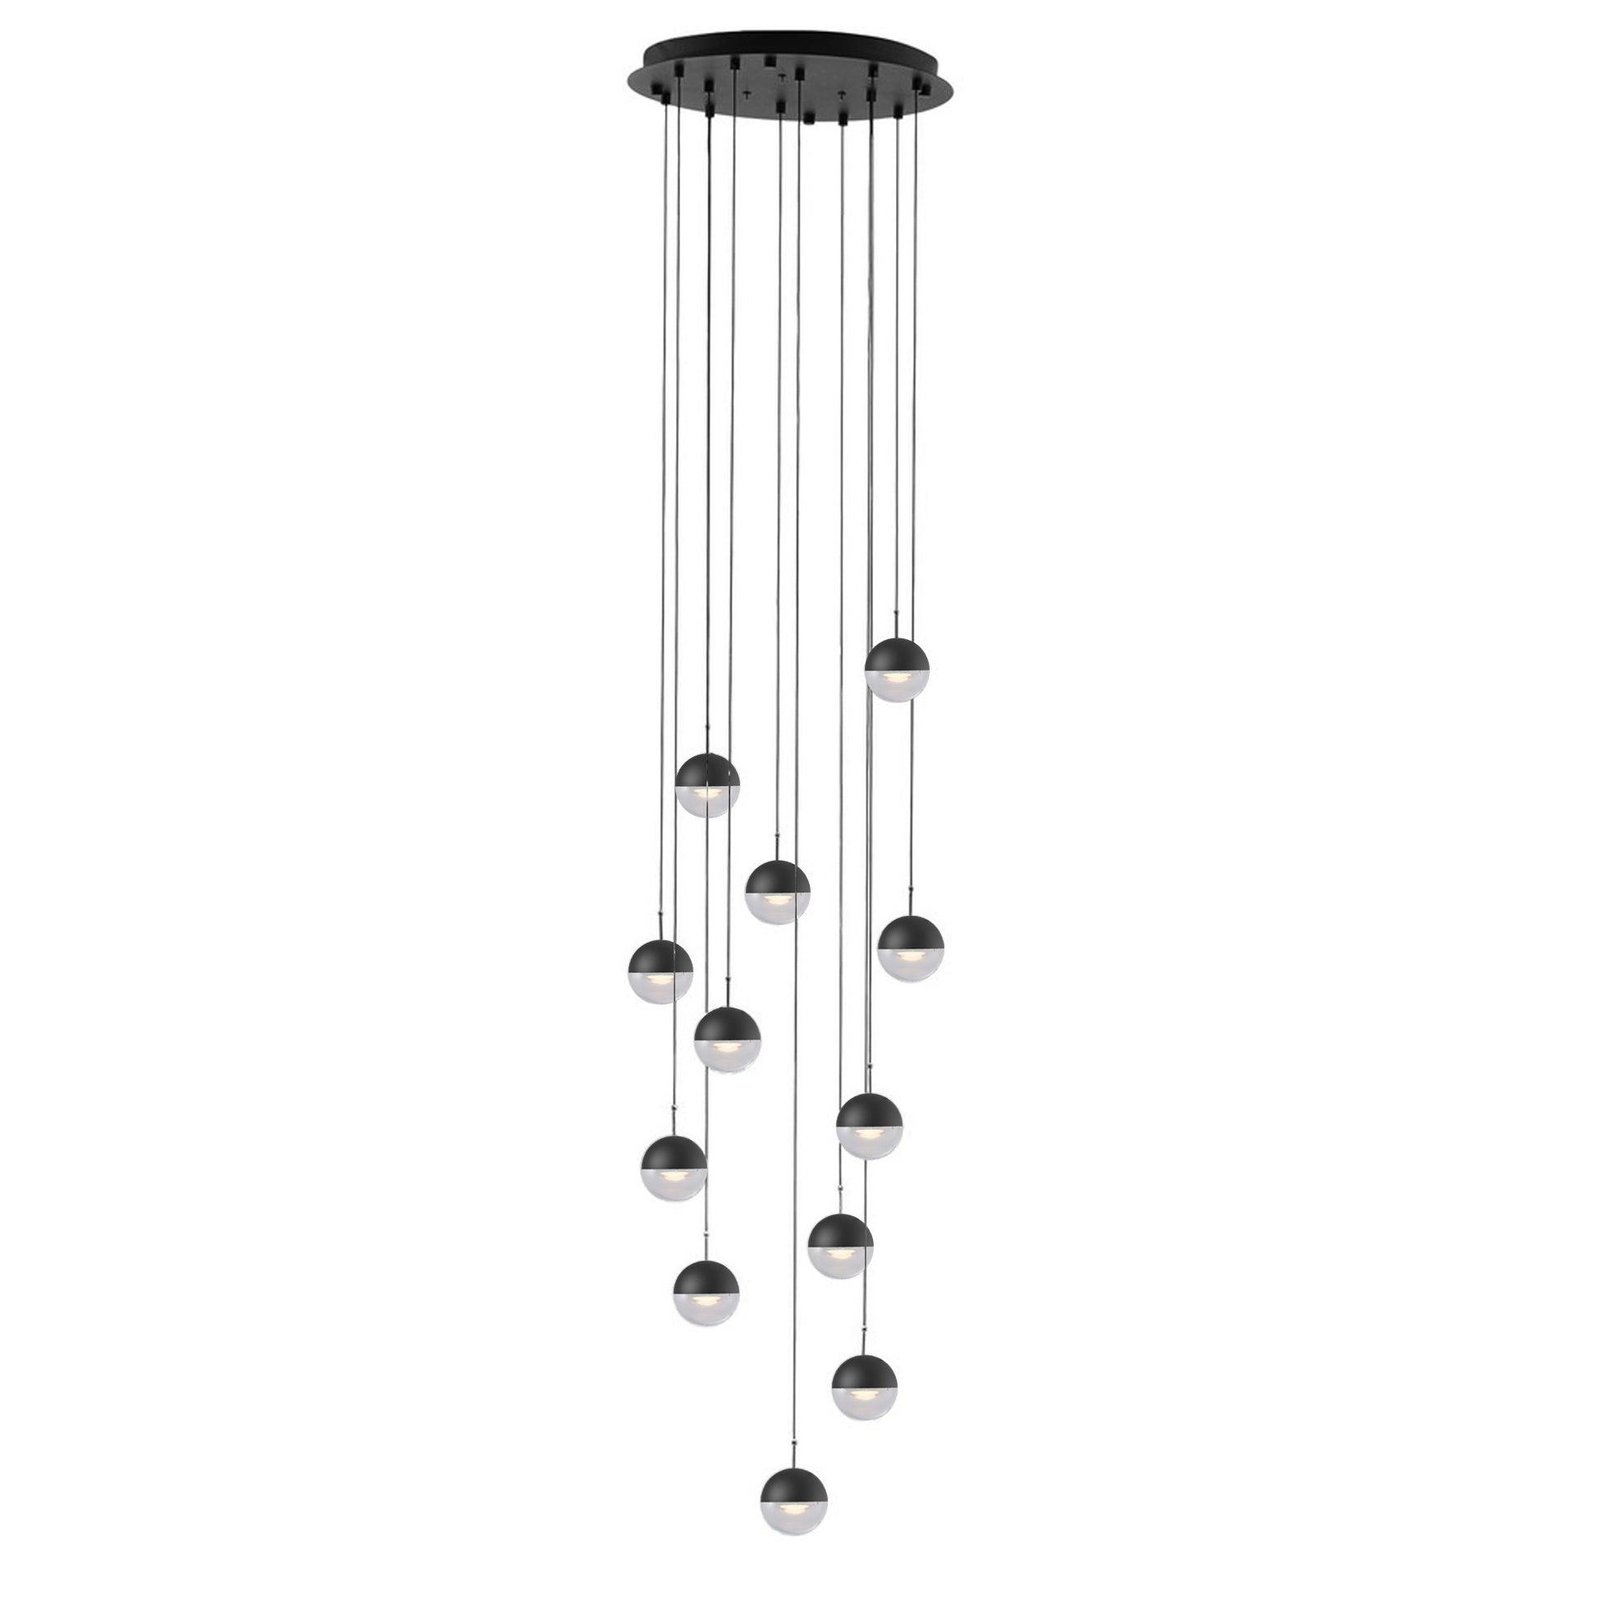 LED Pendant Light Dora with 12 heads, measuring 17.7" in diameter and 78.7" in height (45cm x 200cm), available in matt black finish with a cold white glow.